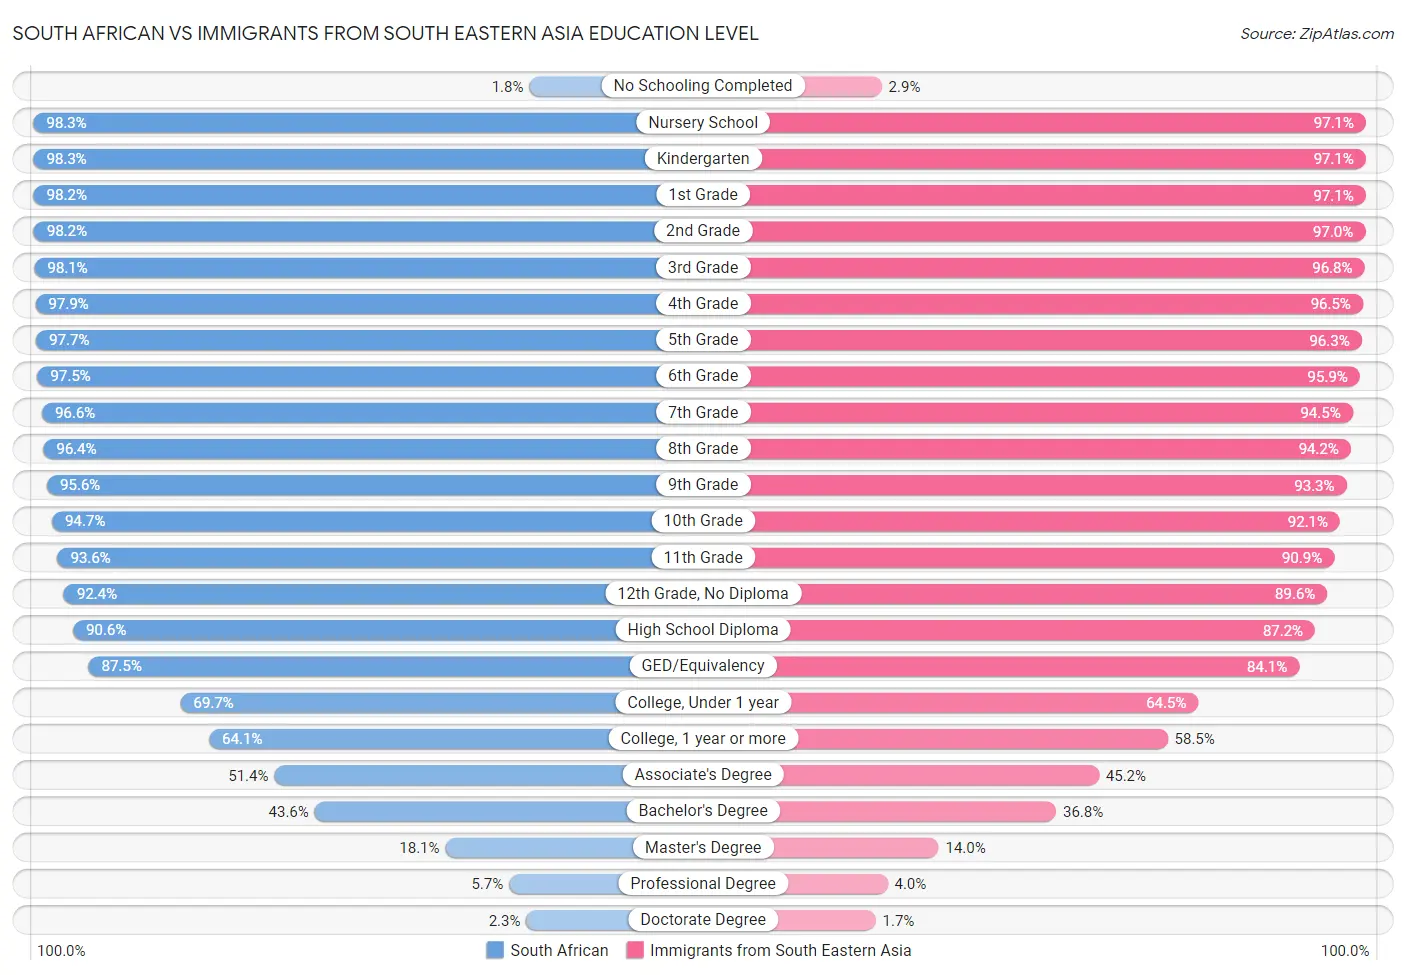 South African vs Immigrants from South Eastern Asia Education Level